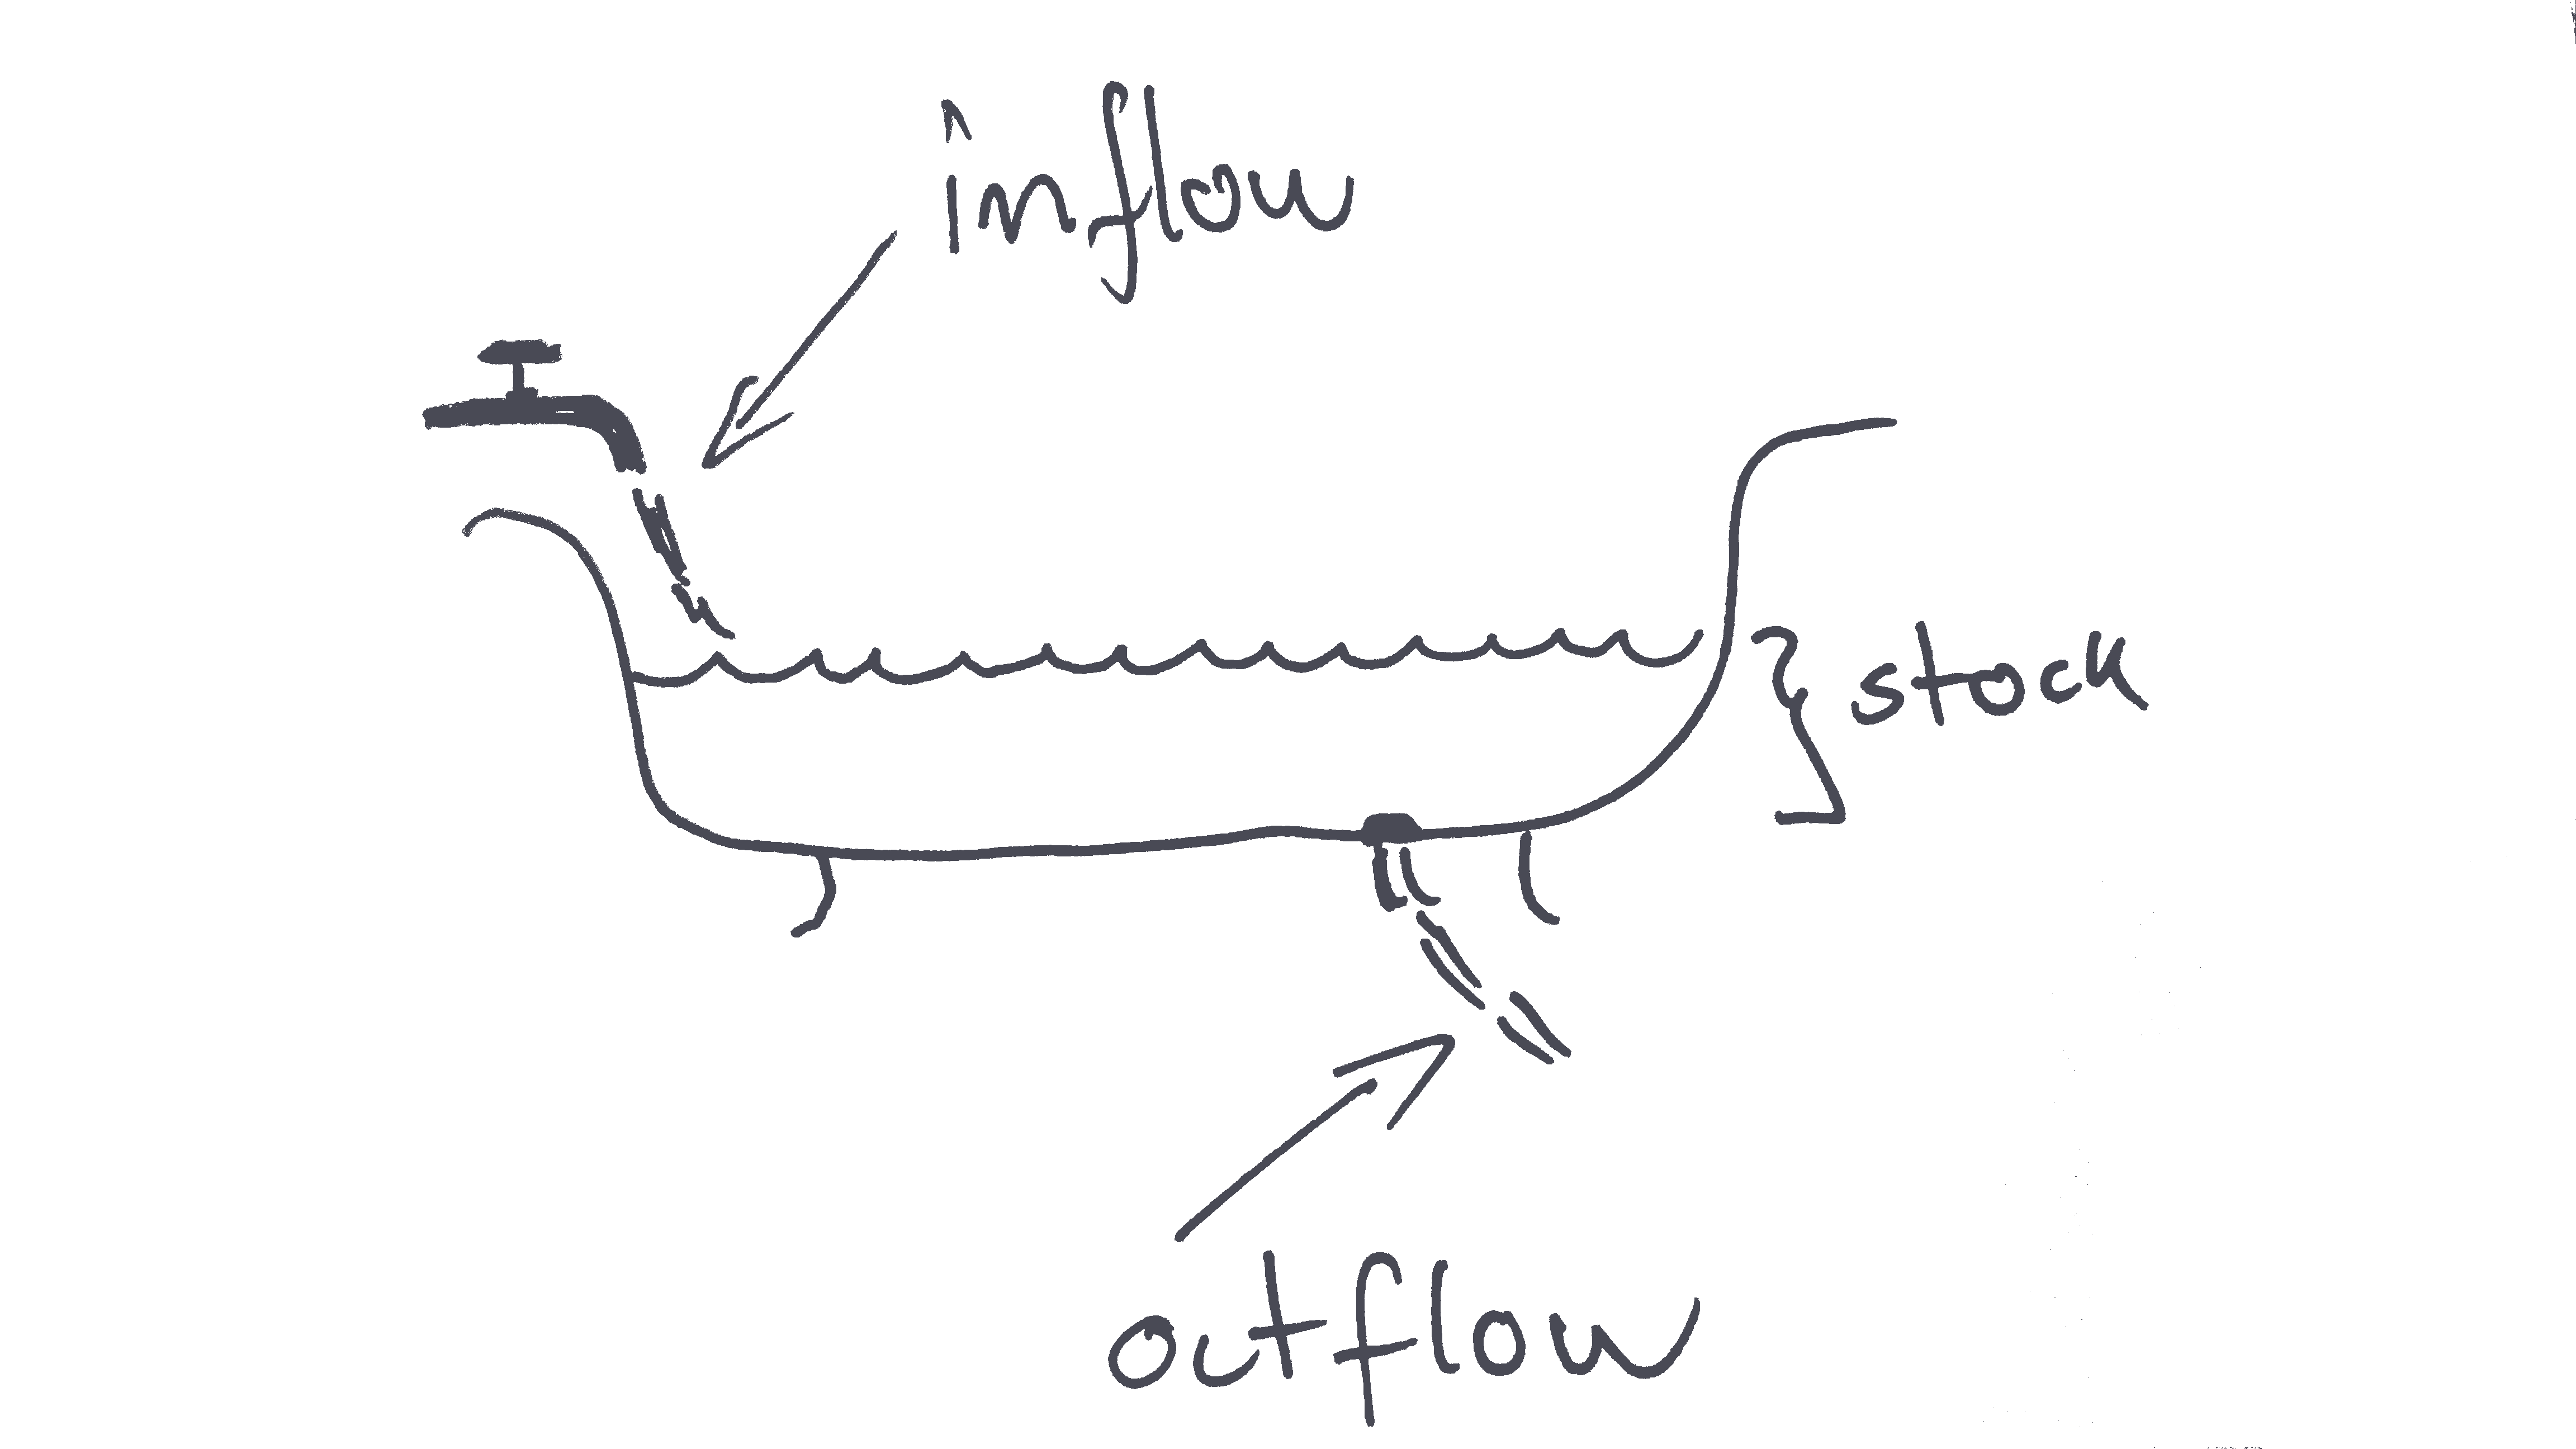 A bathtub with water illustrating flows and stocks